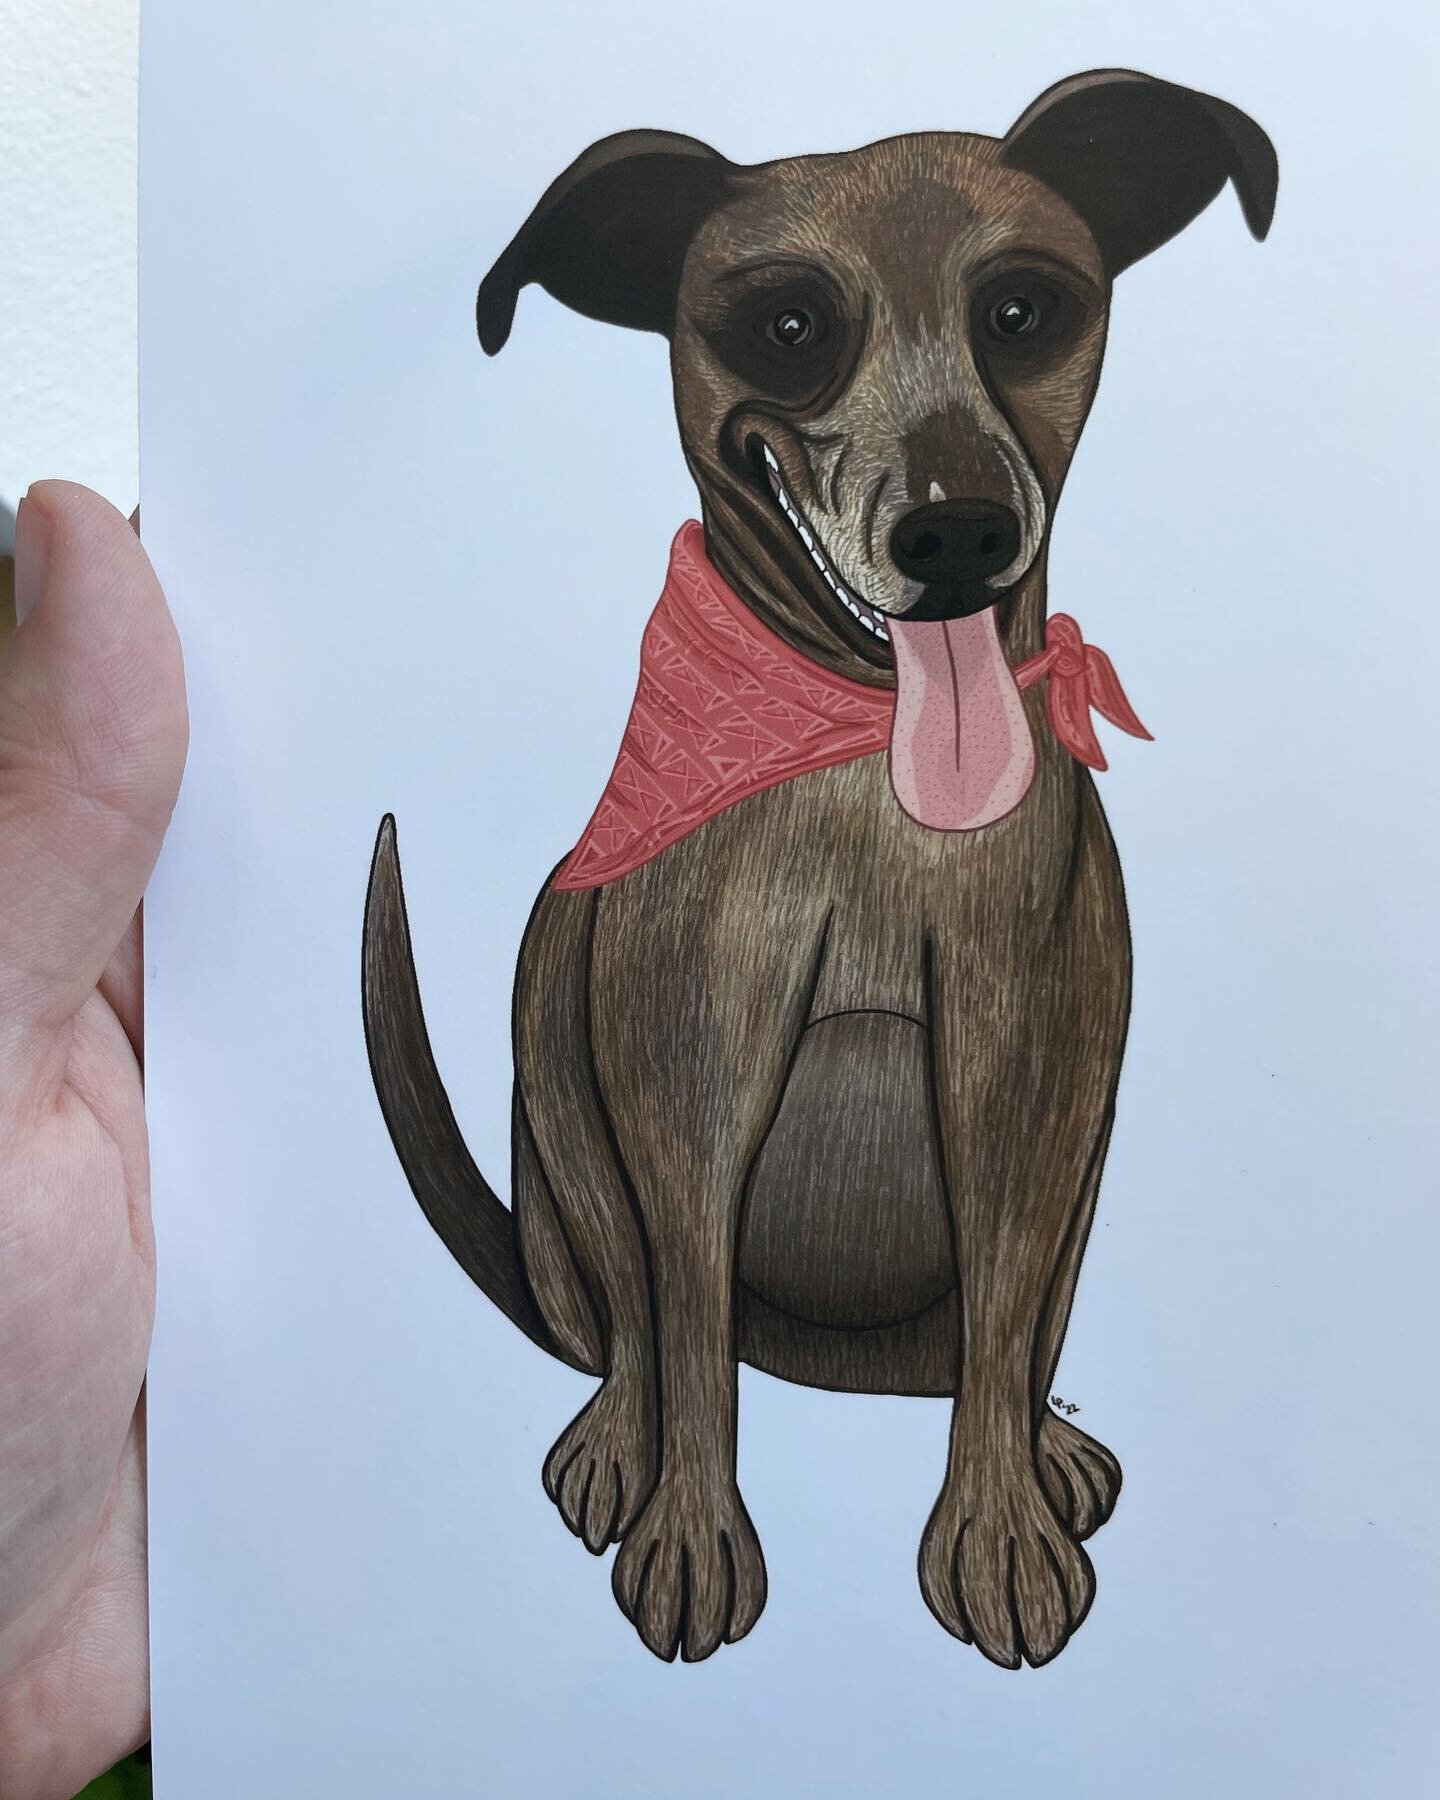 Excited to share this special commission that was gifted today! 🐶 

➡️➡️ Swipe to the see some of the inspo for commemorating the sweet life of Baxter. 

So honored that I was asked to create this piece -and beyond thankful that his family feels I w